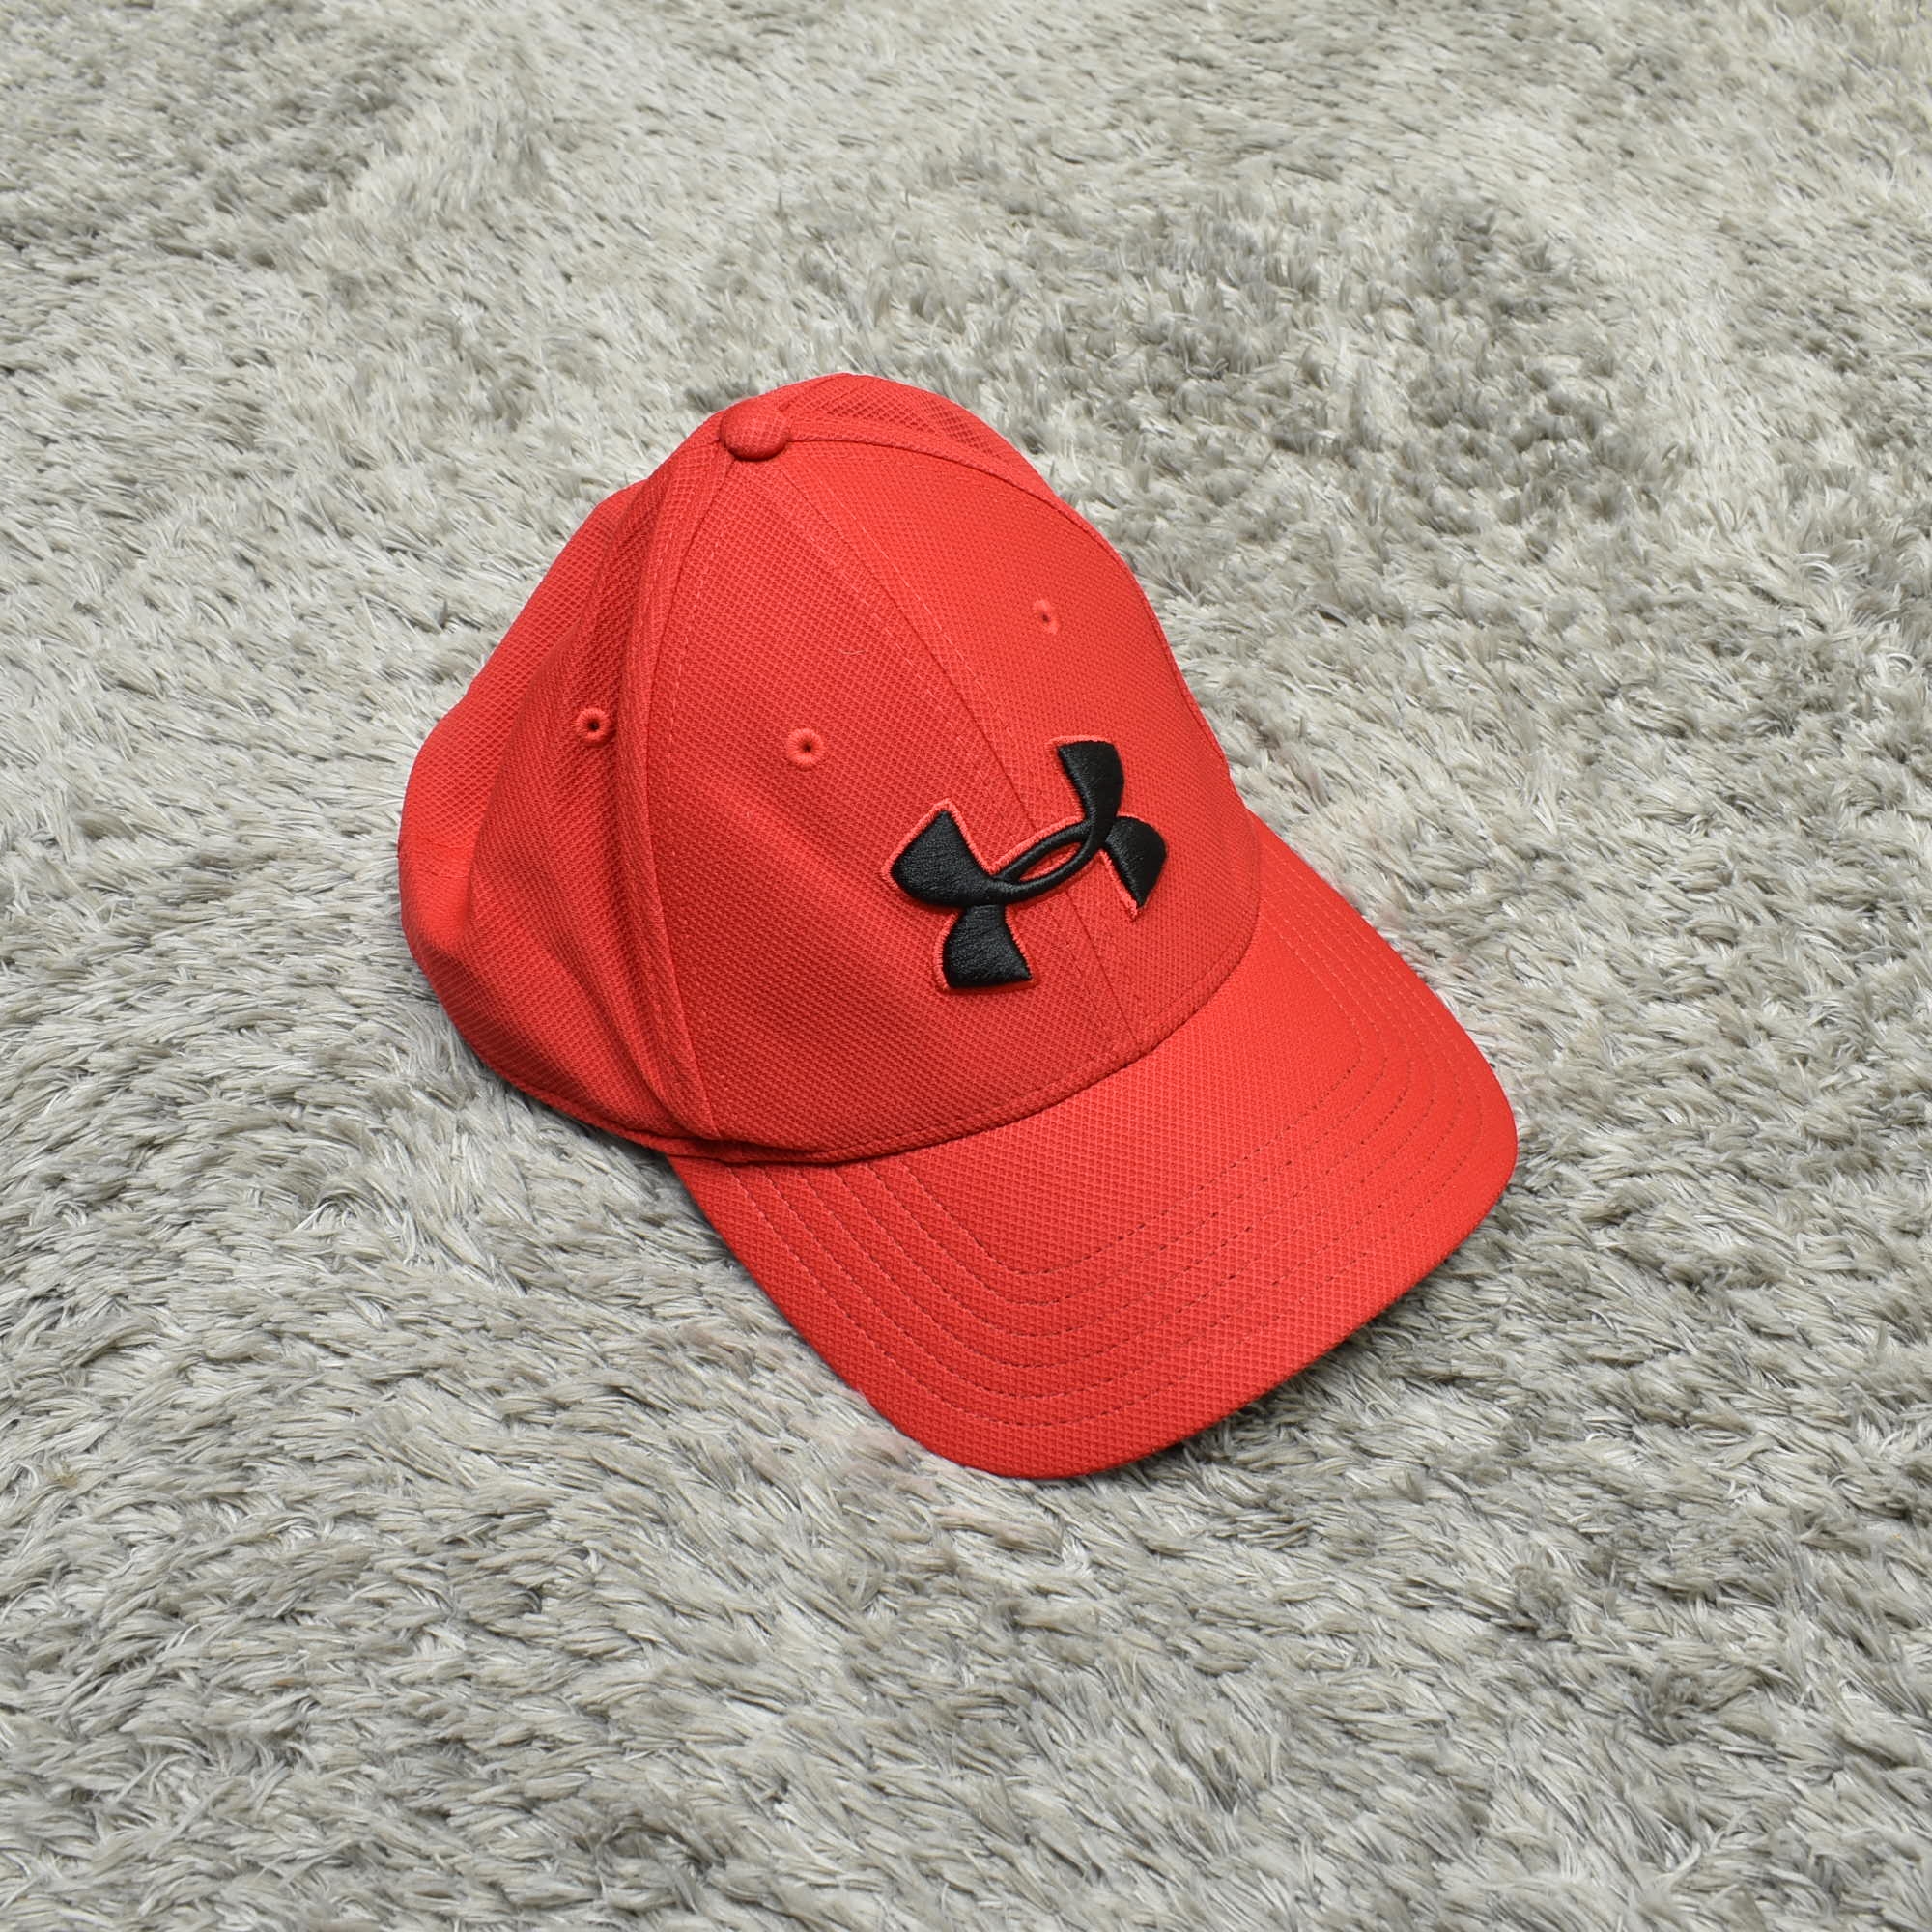 Under Armour Baseball Cap One Size Red Men Adjustable Classic Fit Blitzing  Solid